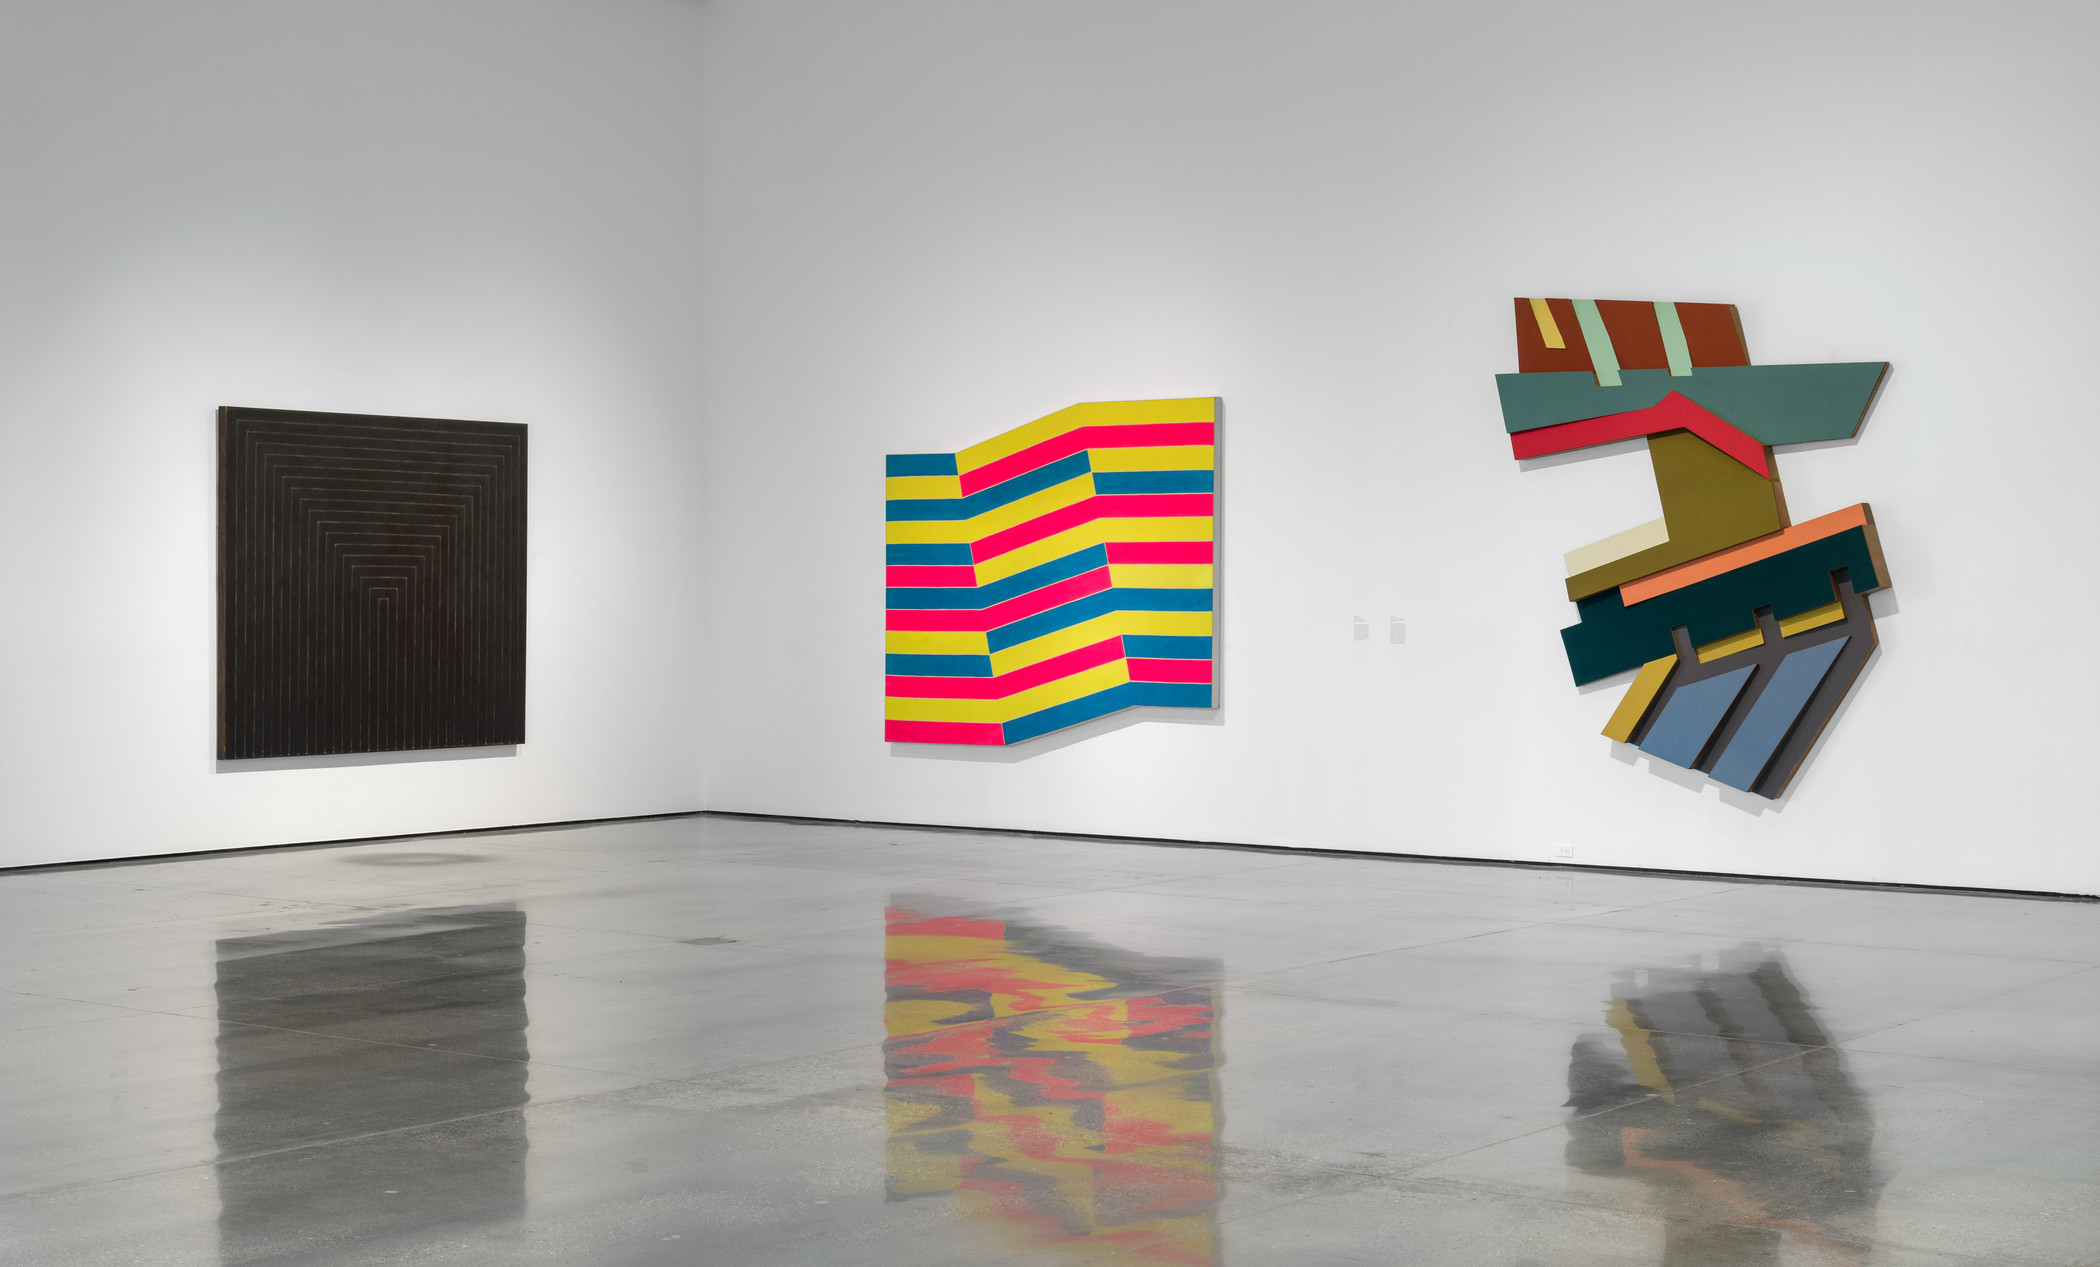 Installation photograph, Frank Stella: Selections from the Permanent Collection, Los Angeles County Museum of Art, May 5–September 15, 2019, art © 2019 Frank Stella/Artists Rights Society (ARS) New York, photo © Museum Associates/LACMA. From left: Getty Tomb, 1959, Contemporary Art Council Fund; Bampur, 1966, gift of the Phil Gersh Agency, Inc. through the Contemporary Art Council; Rozdol II, 1973, gift of The Douglas S. Cramer Foundation